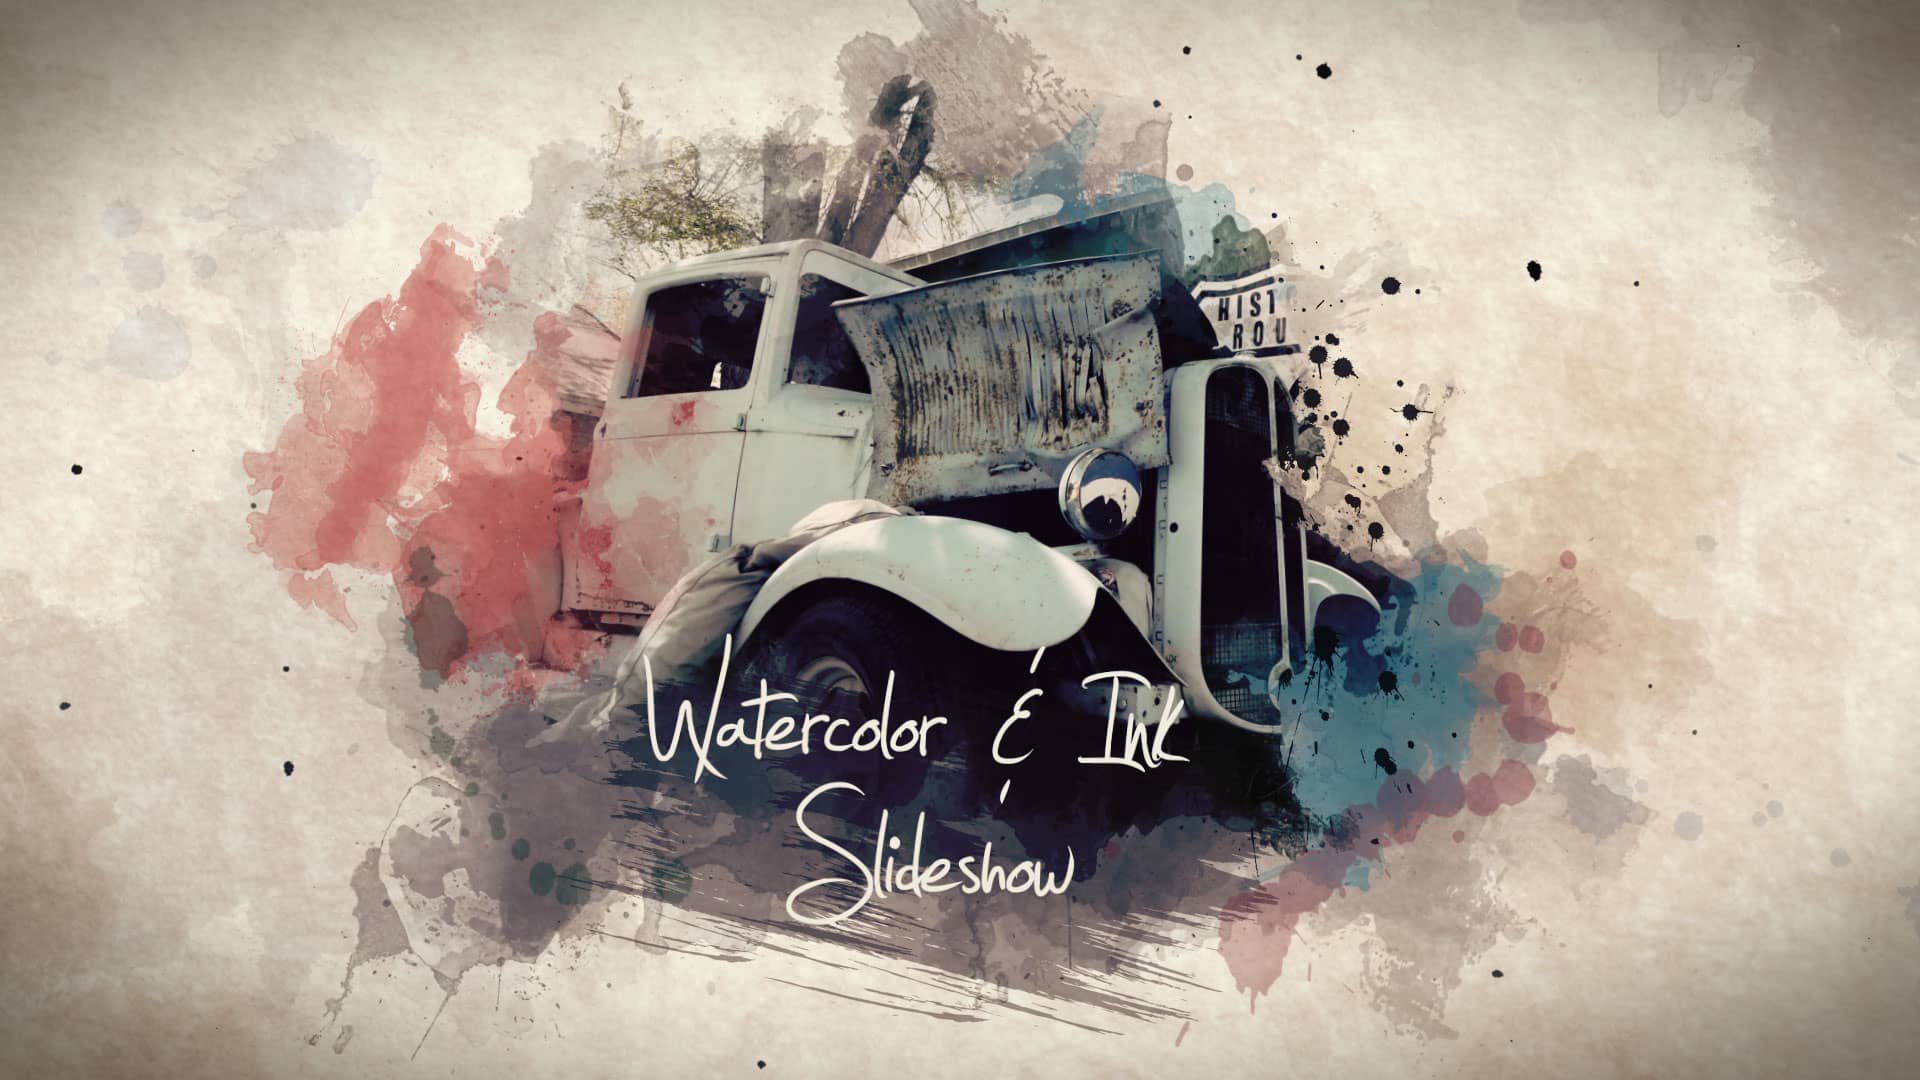 watercolor-ink-slideshow-after-effects-template-on-vimeo